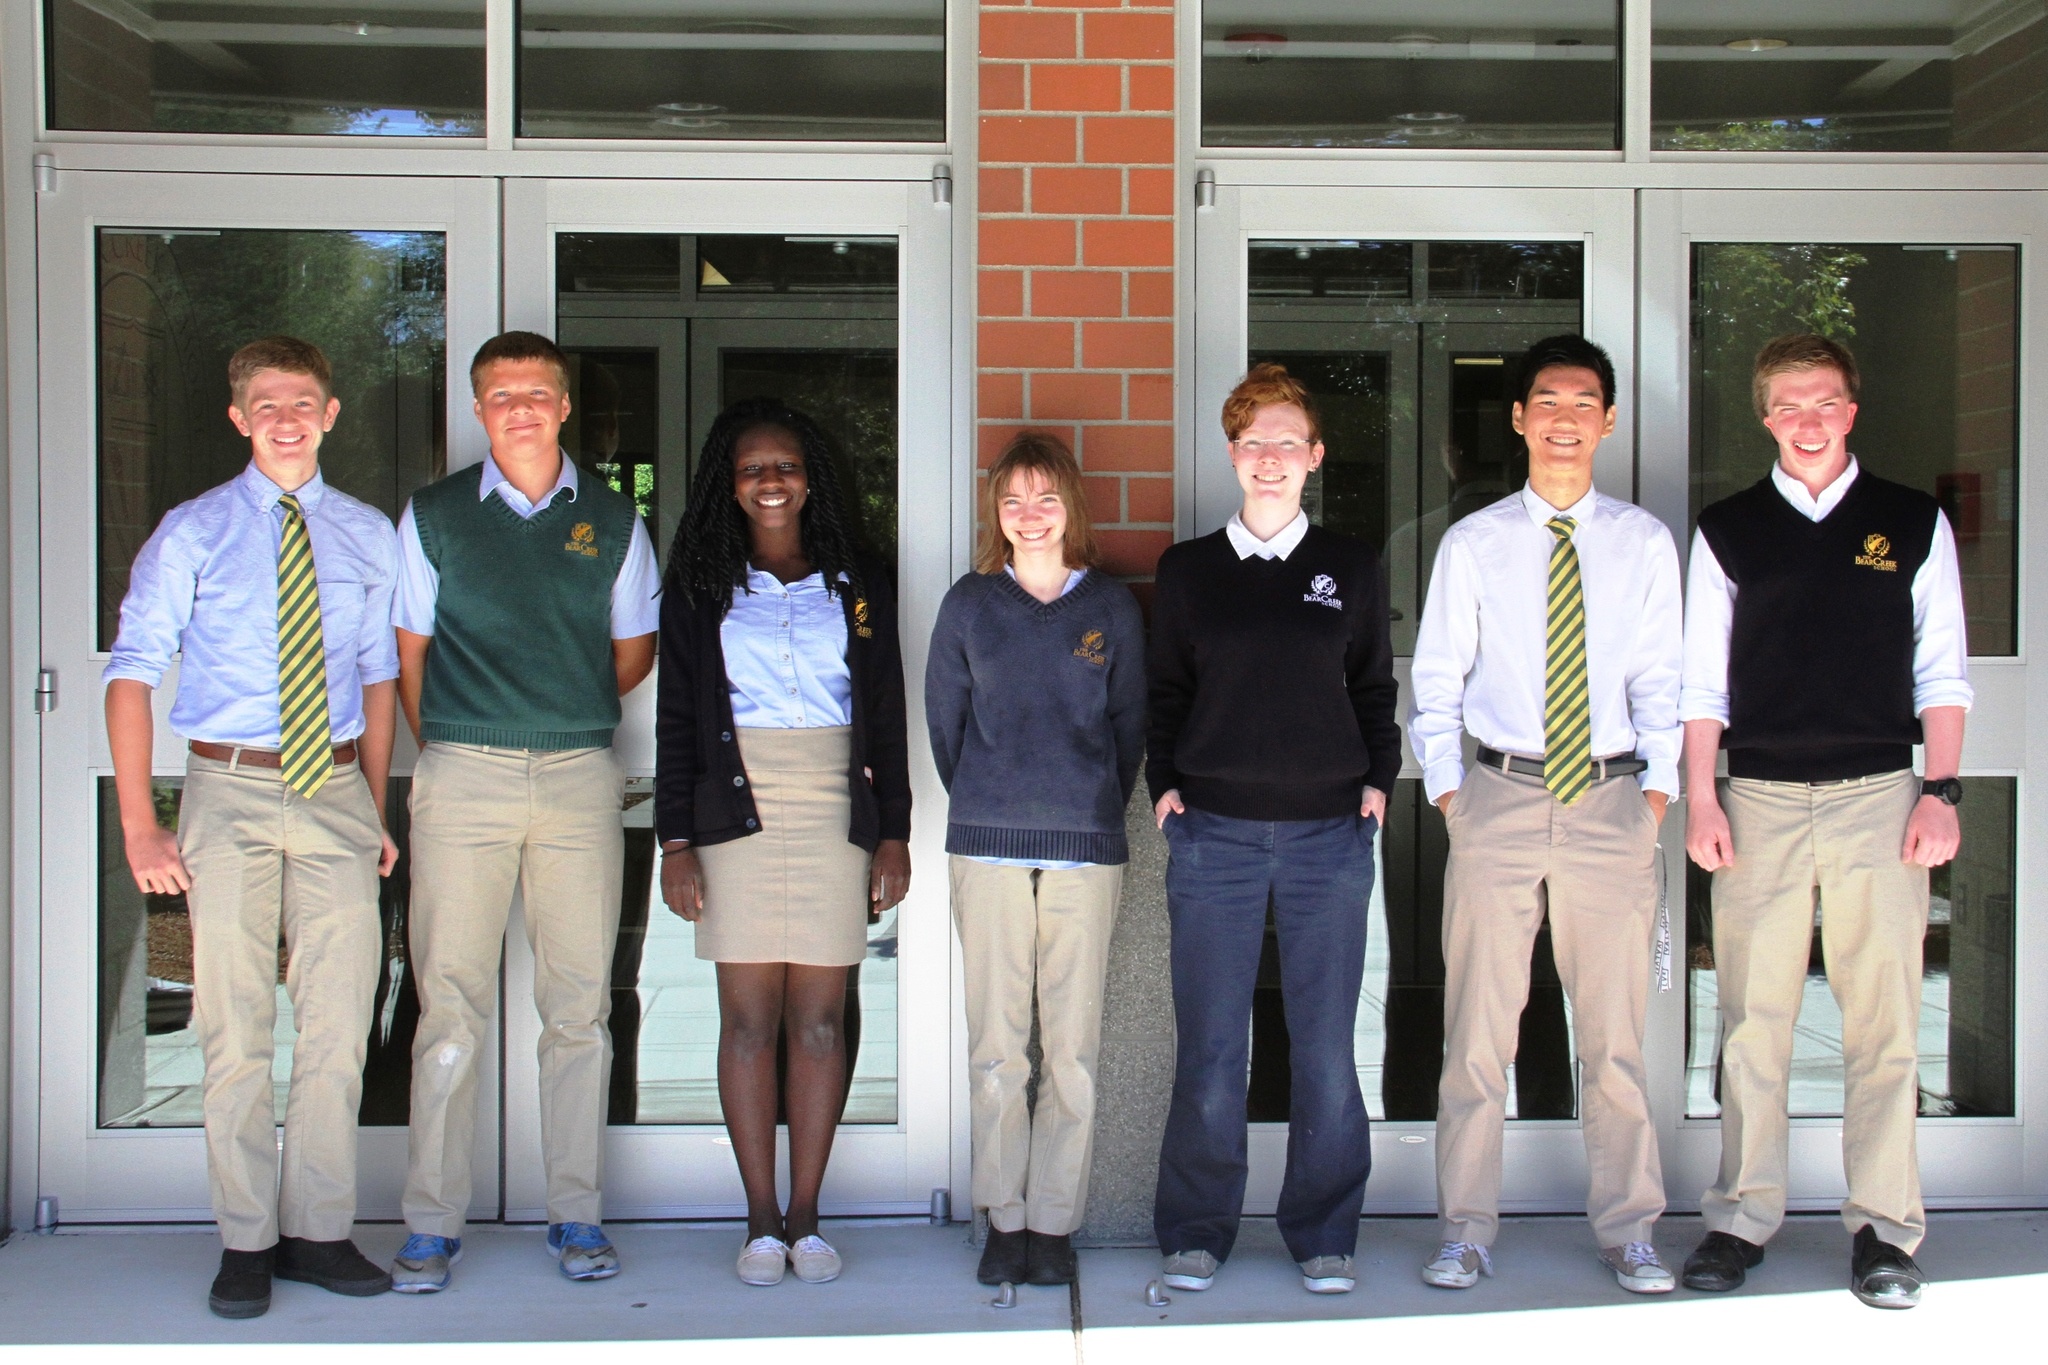 The National Merit Scholarship Corporation has named seven Bear Creek students as semifinalists/commended students among 16